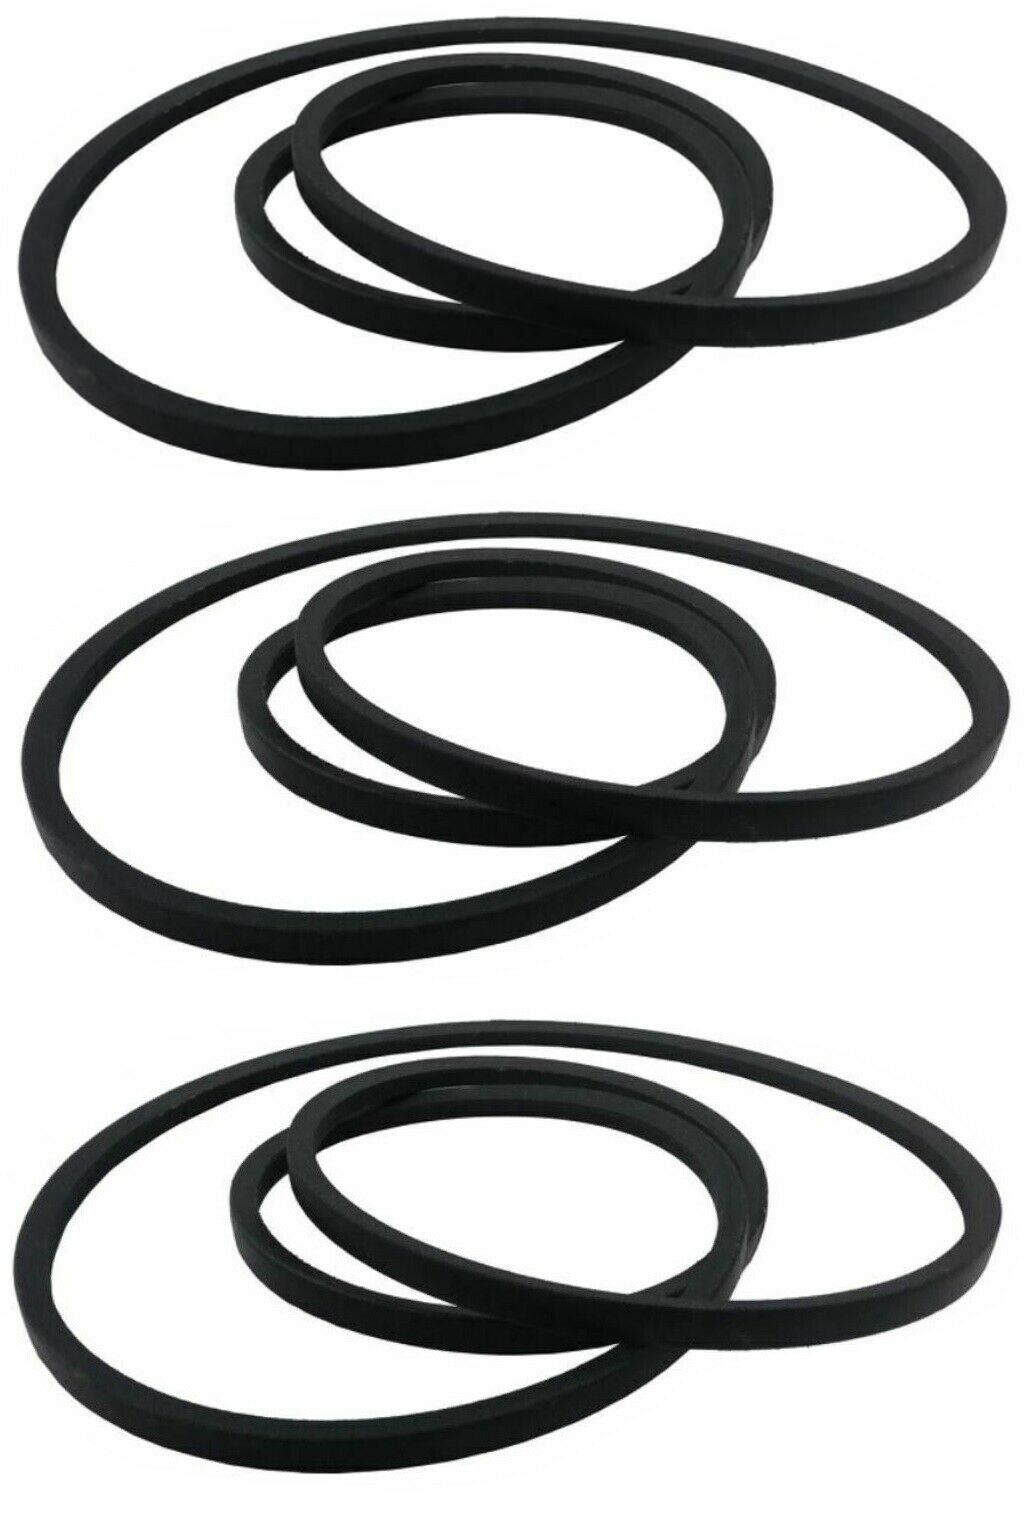 (3) Replacement Drive Belts For Delta 49-124 Unisaw 3450 Rpm Motor